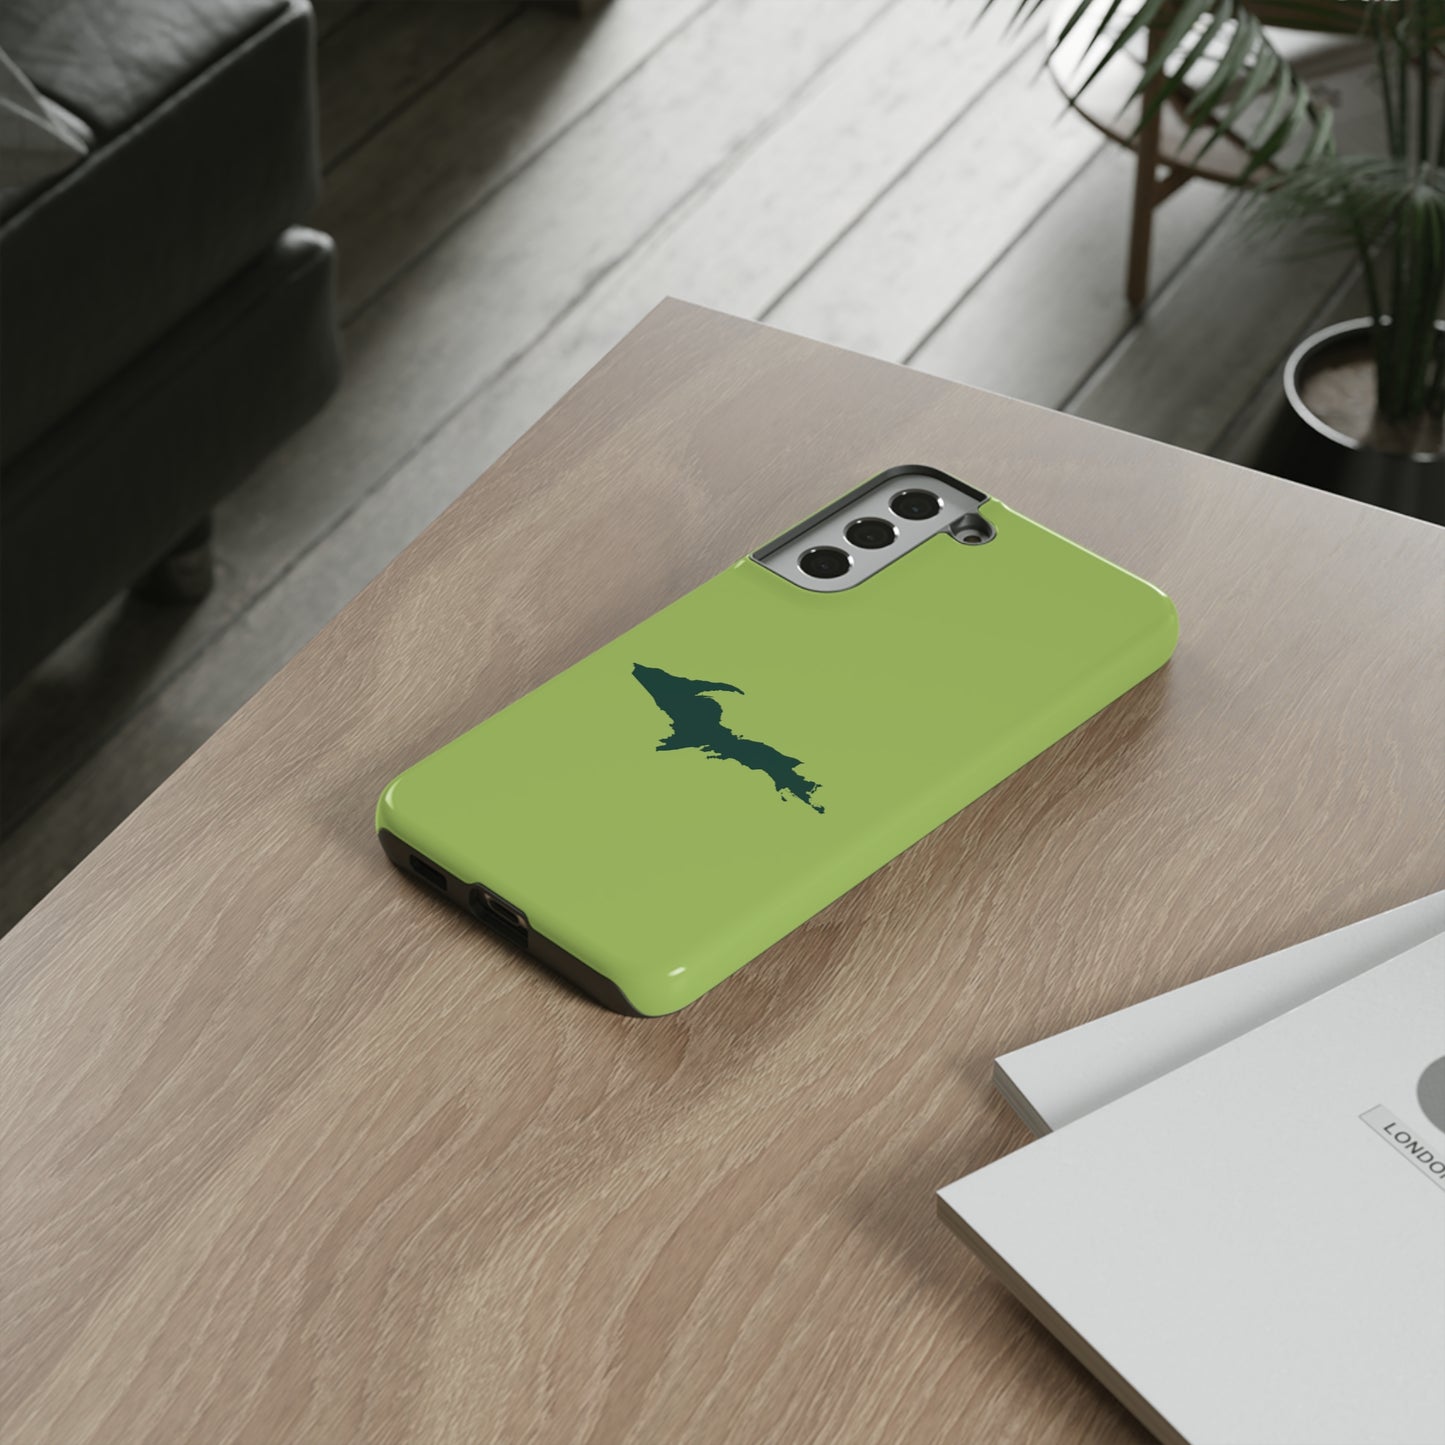 Michigan Upper Peninsula Tough Phone Case (Gooseberry Green w/ Green UP Outline) | Samsung & Pixel Android